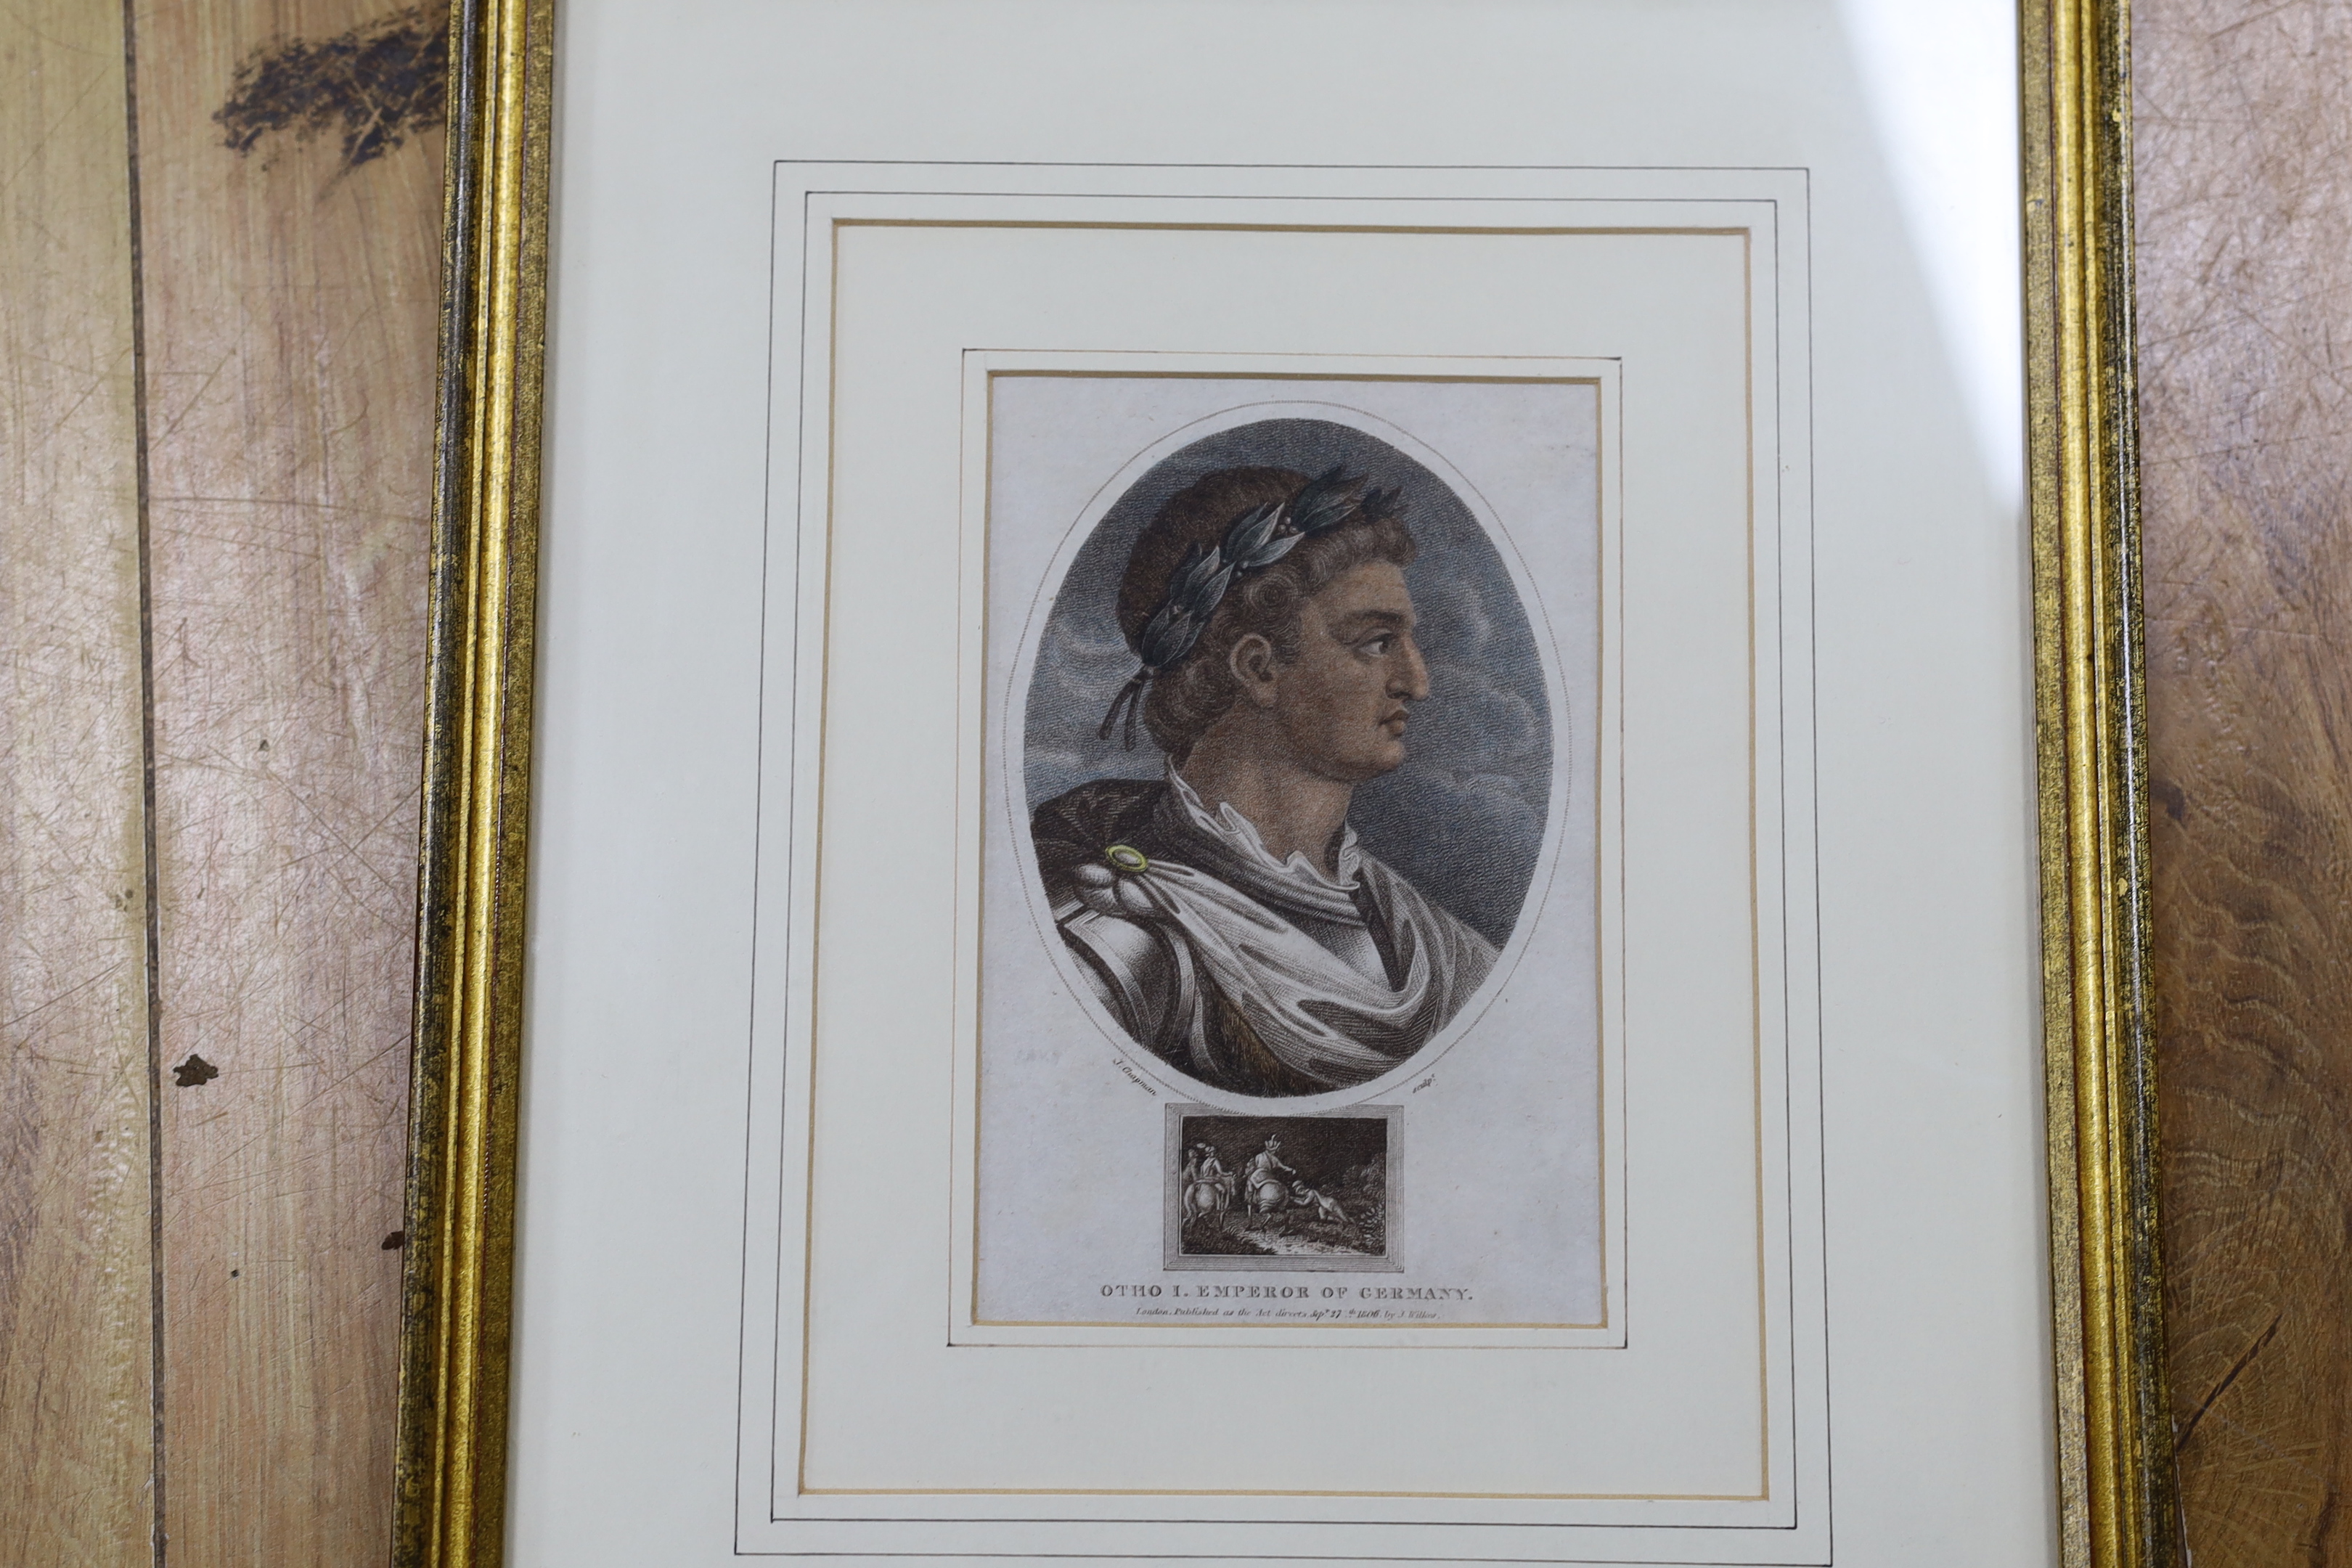 After John Chapman (act. 1792-1823), set of 25 18th/19th century coloured engravings, publ. by J Wilkes, including Edward VI, Francis II of France and Otho I Emperor of Germany, each 15 x 9cm